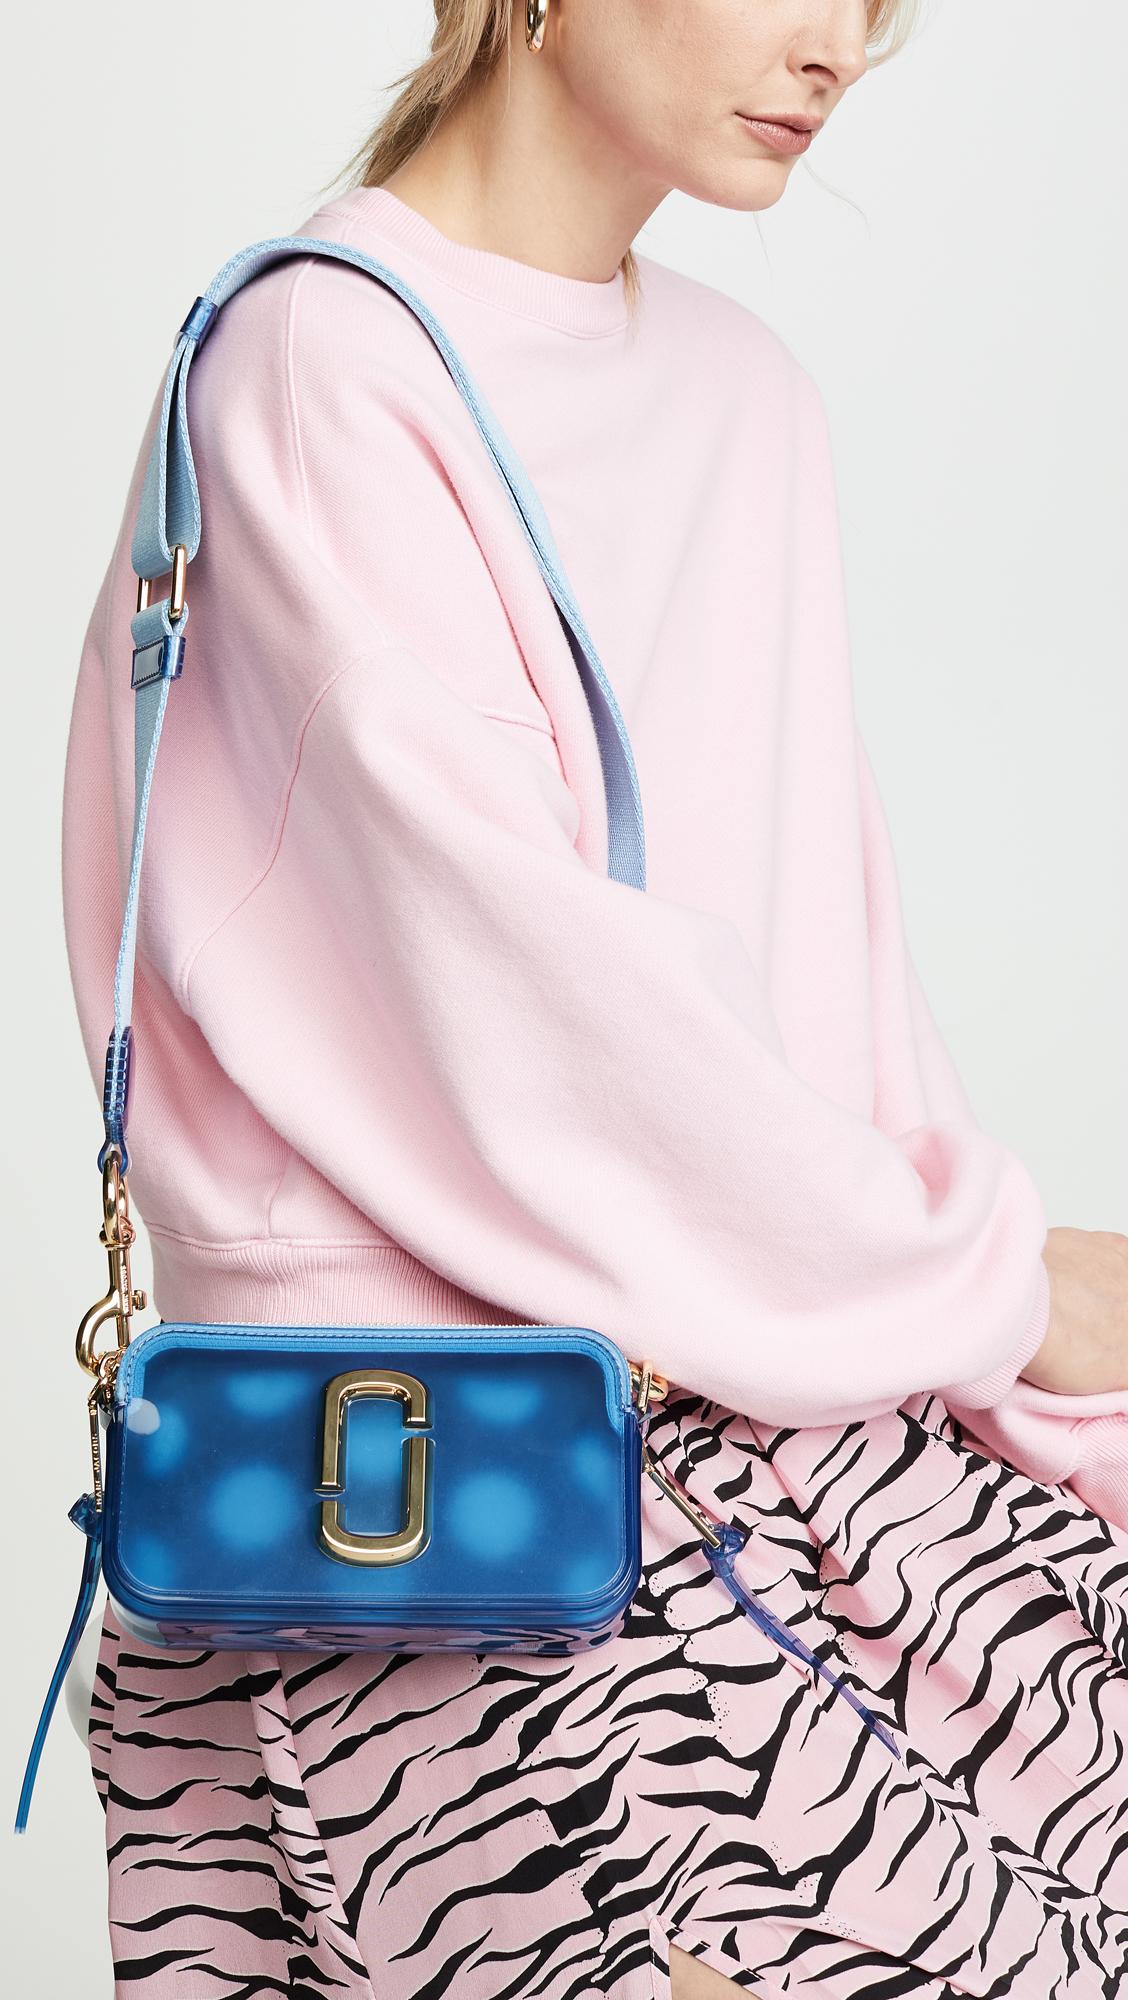 Marc Jacobs The Jelly Snapshot Camera Bag in Blue